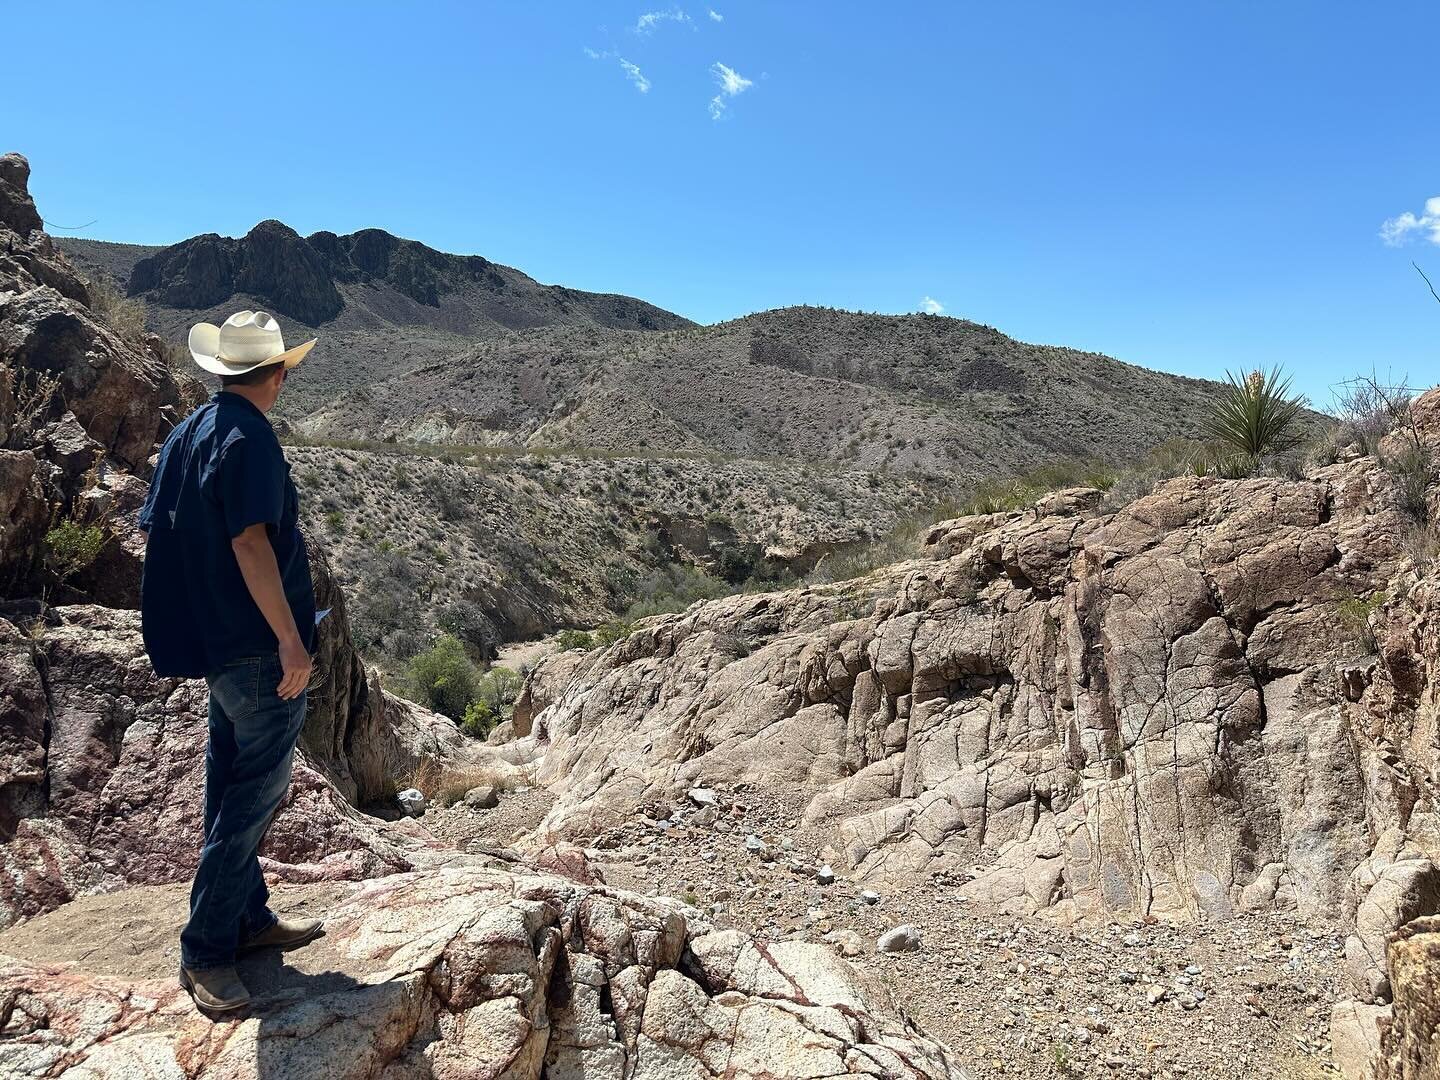 People always ask what to do down here, where do I go, what do I explore?  Walk an arroyo&hellip;you&rsquo;ll always find something cool :) #bigbendnationalpark #bigbendranchsp #rvlifestyle #rvadventures #goexplore #creekview #naturelovers #anothervi